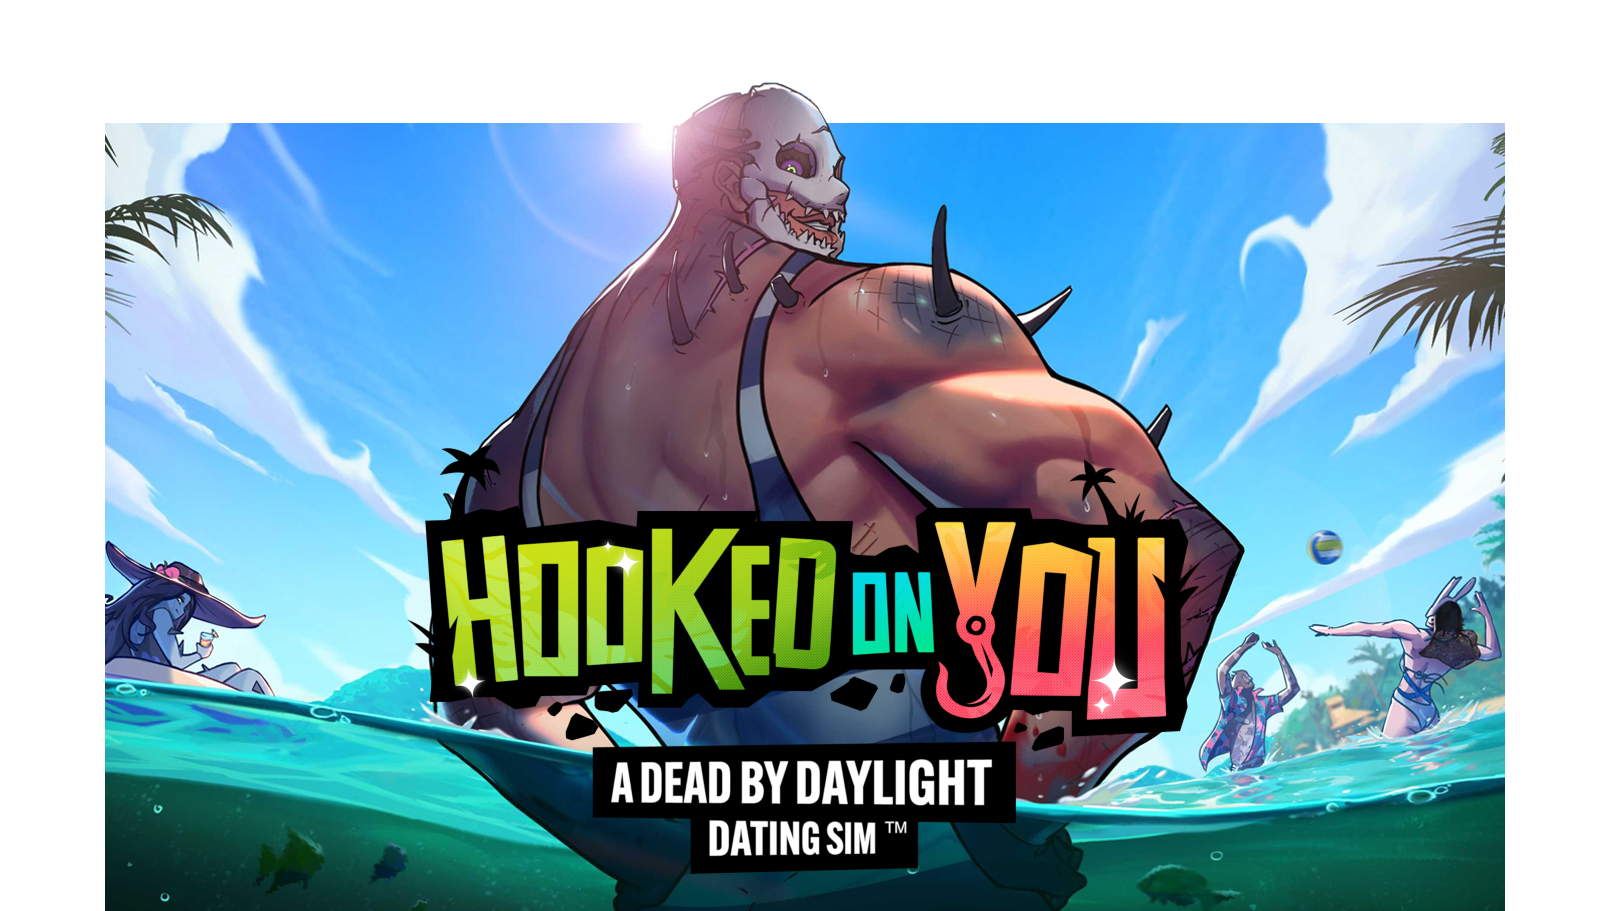 Hooked on You: A Dead by Daylight Dating Sim - Official Launch Trailer 